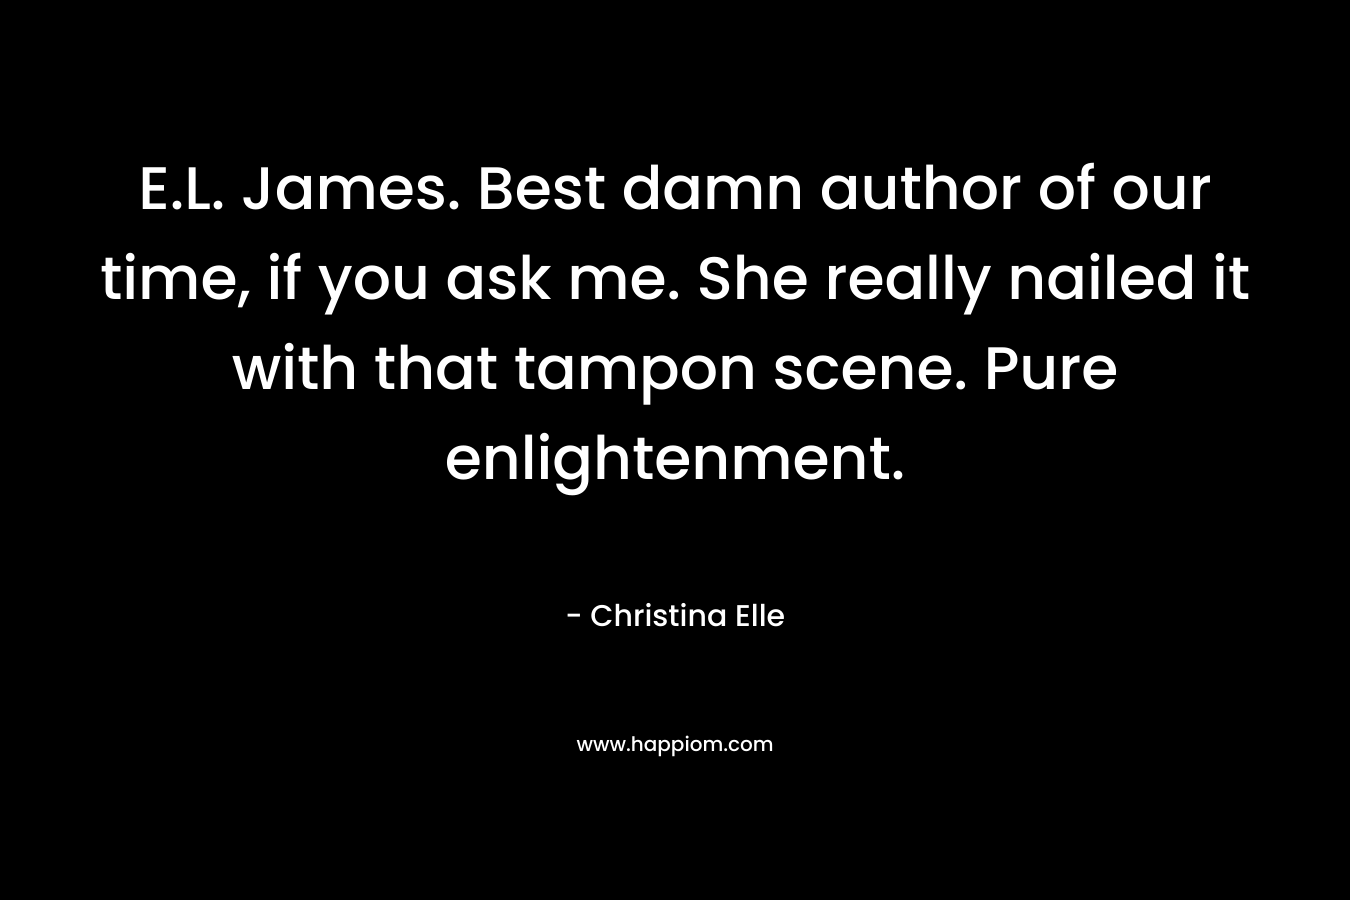 E.L. James. Best damn author of our time, if you ask me. She really nailed it with that tampon scene. Pure enlightenment. – Christina Elle